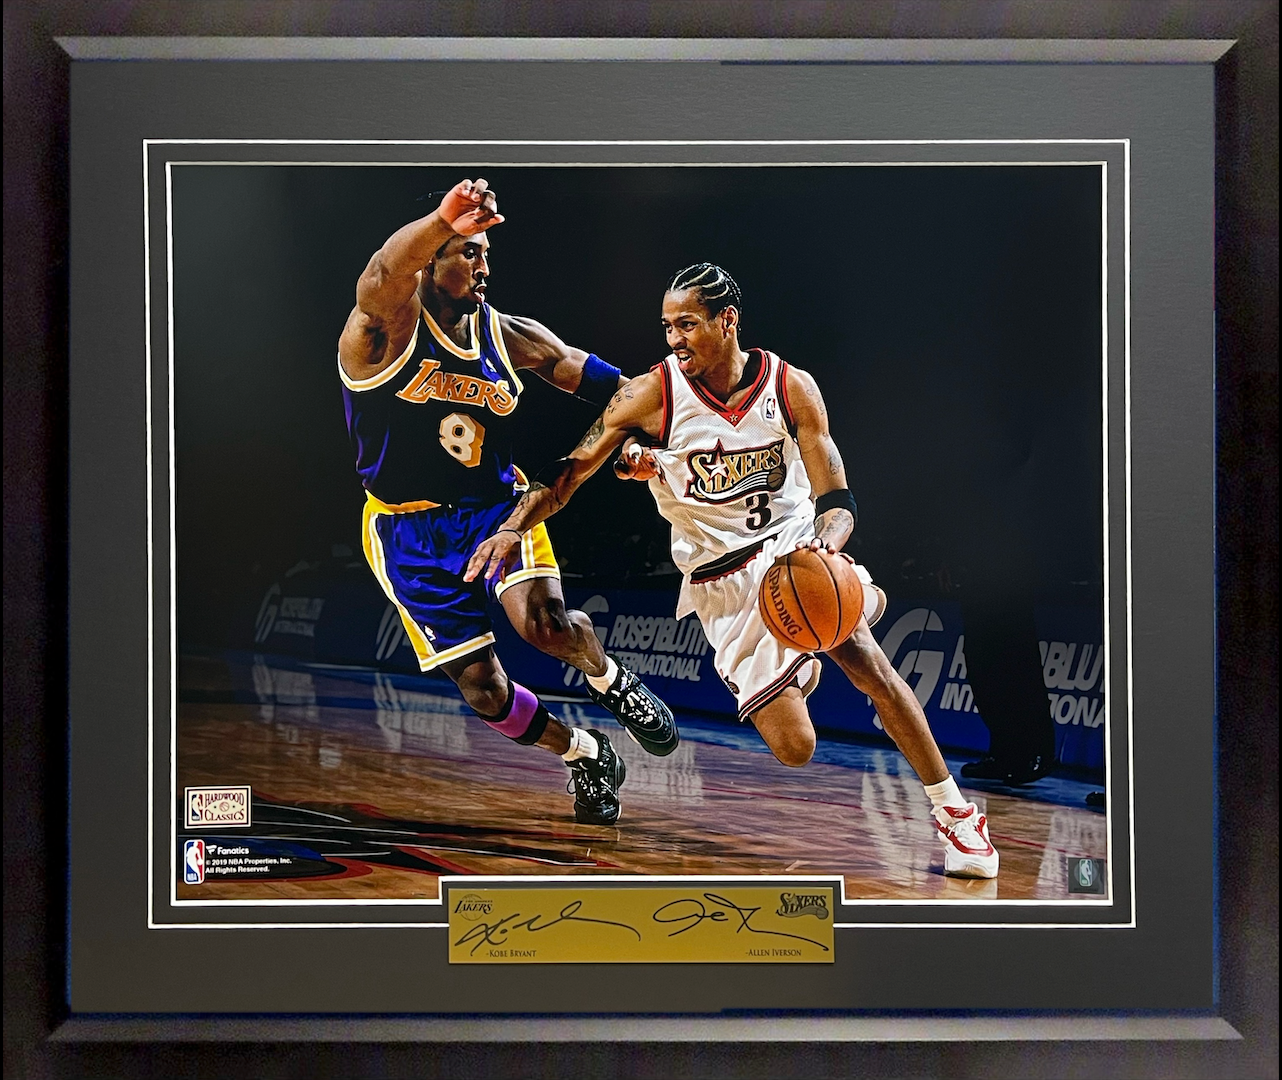 Kobe Bryant and Allen Iverson 16x20 Framed Photograph Engraved